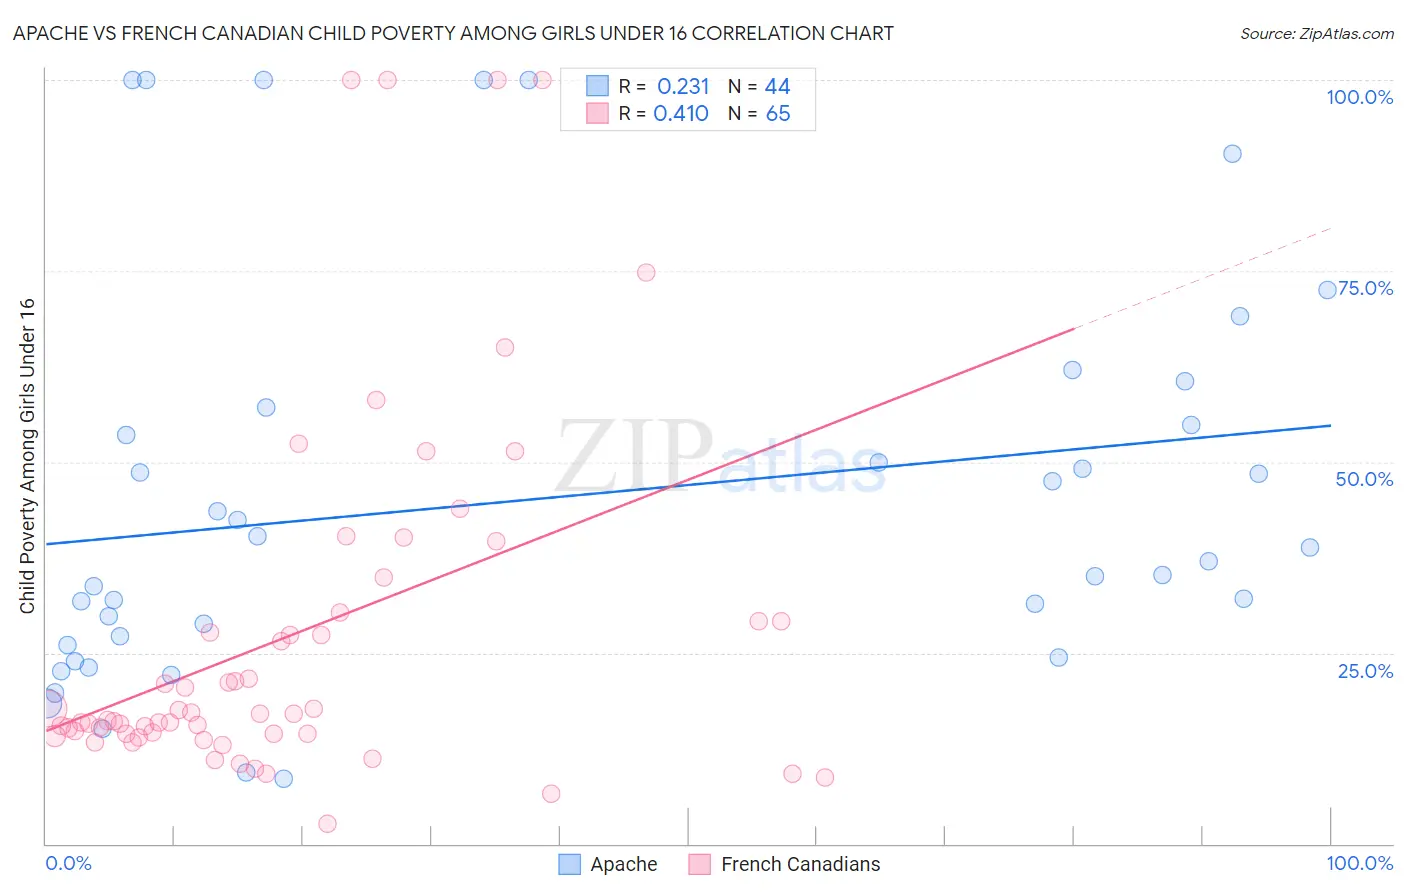 Apache vs French Canadian Child Poverty Among Girls Under 16